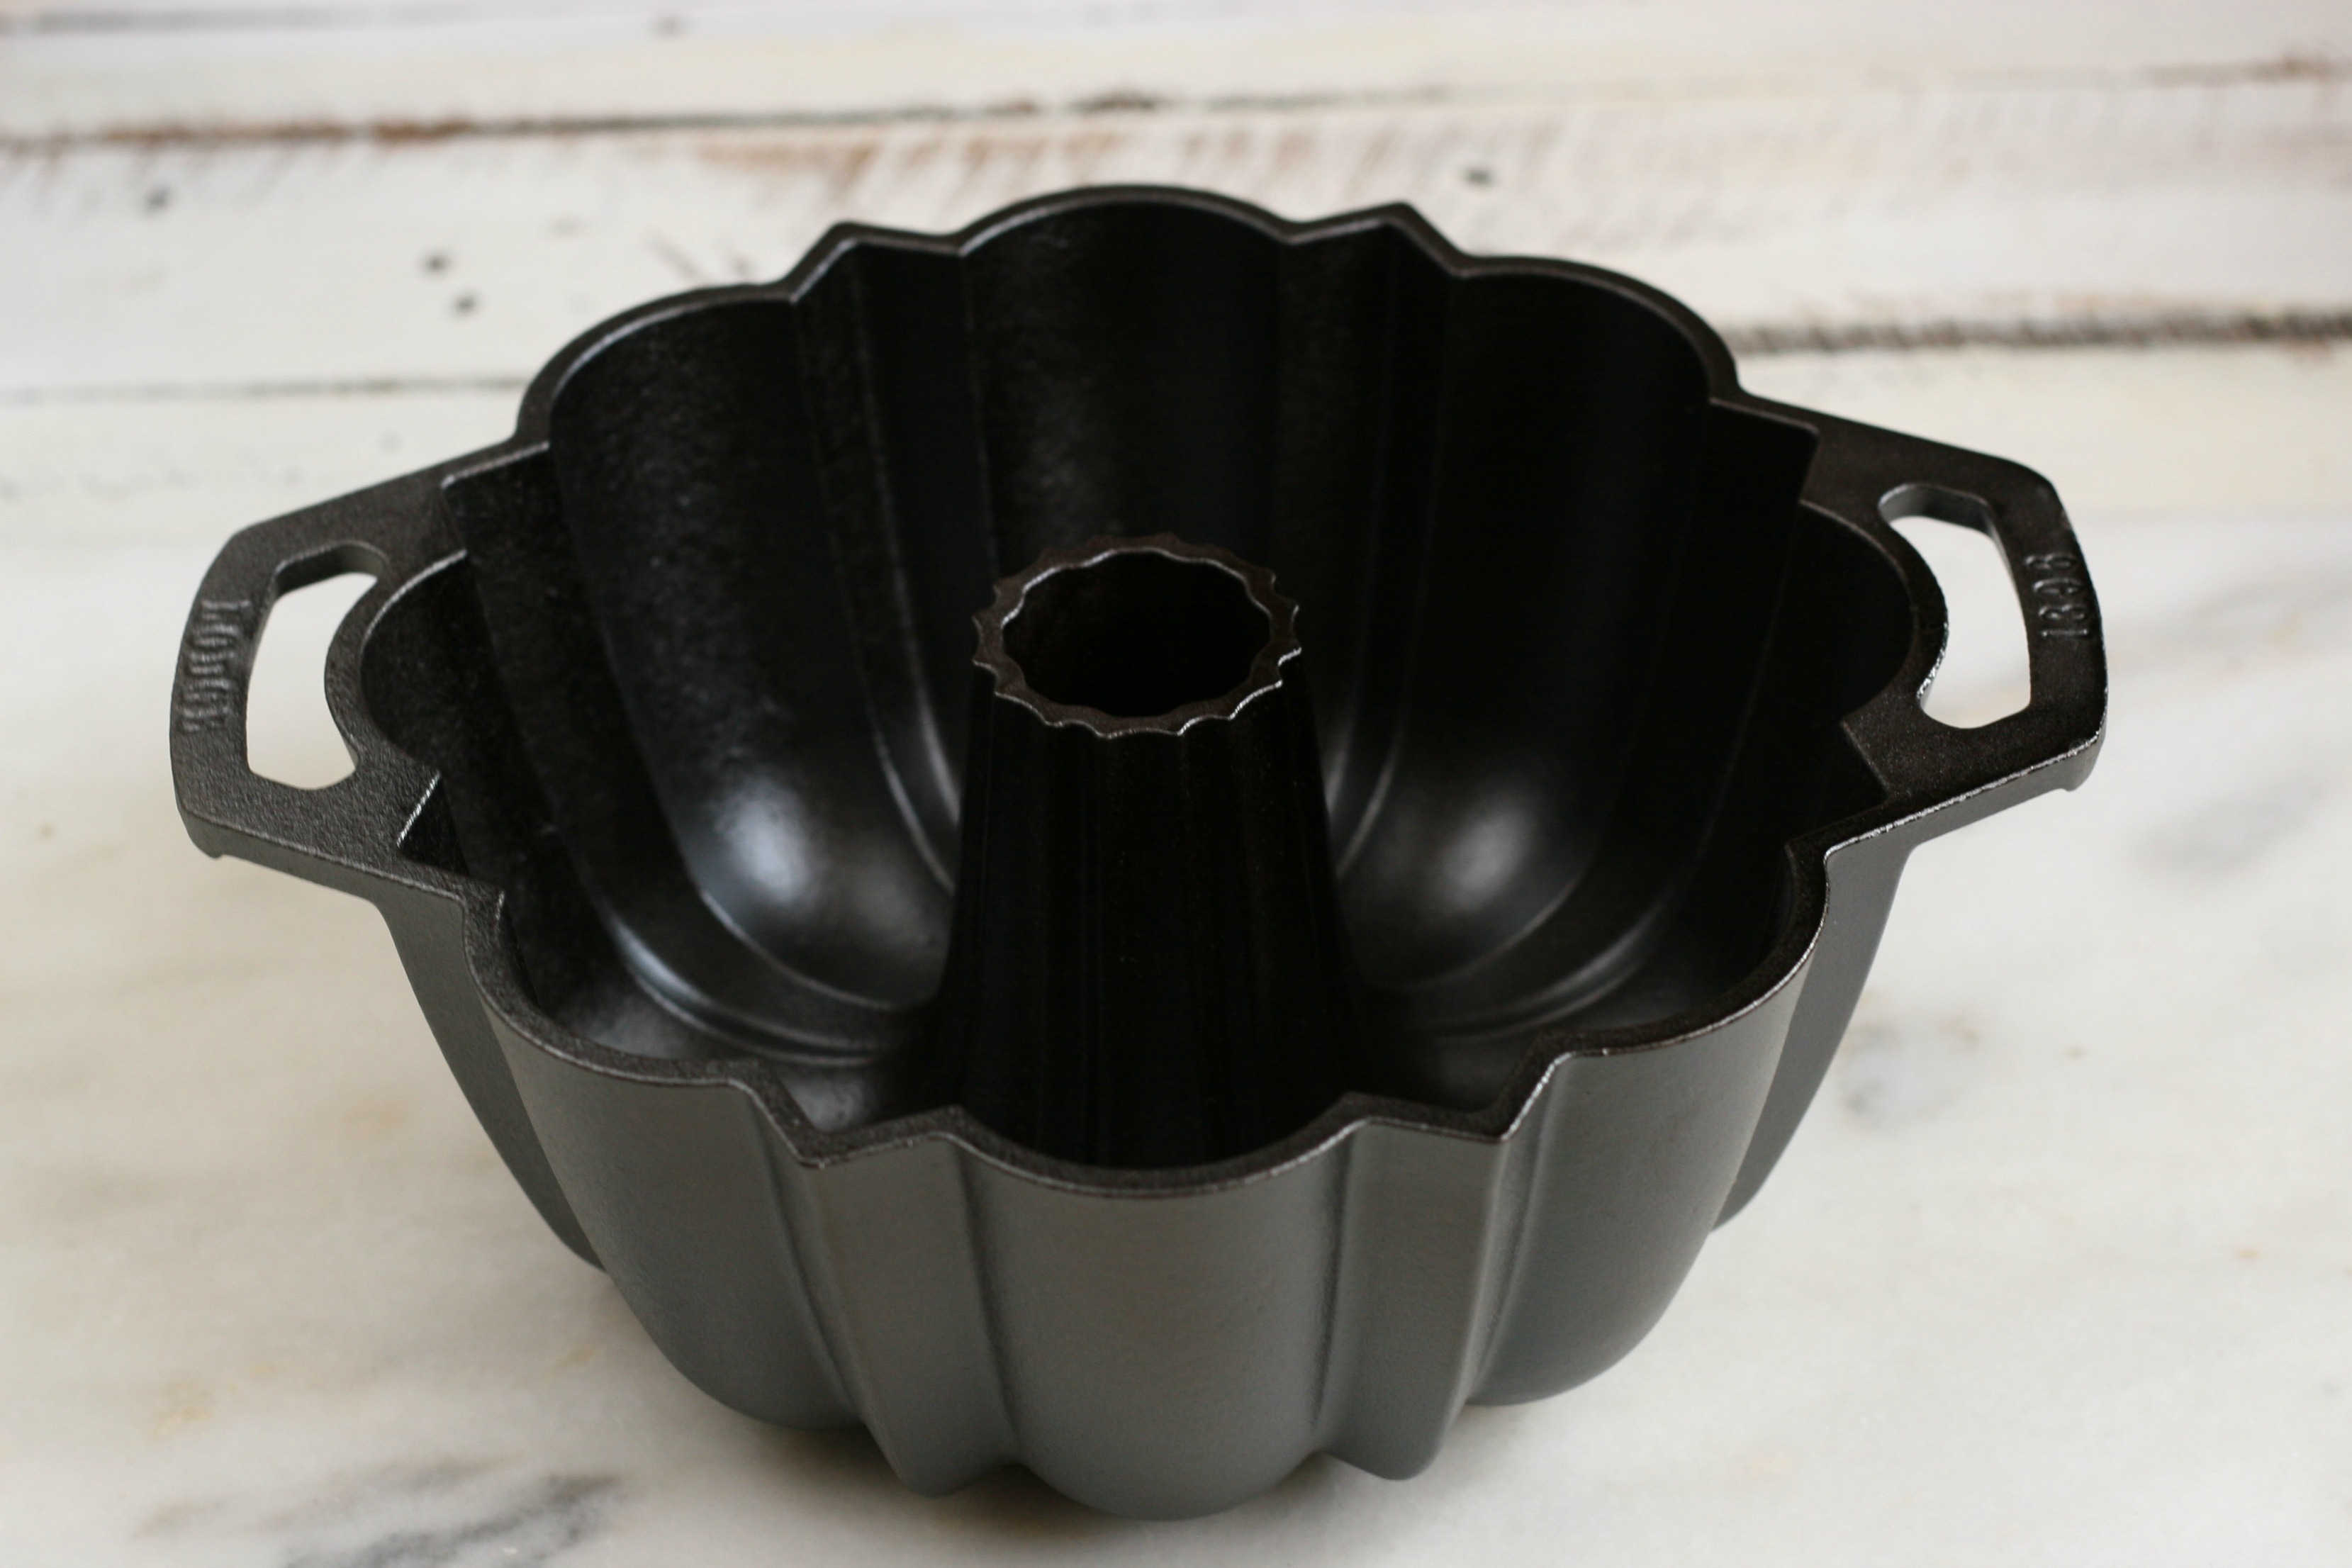 Lodge cast iron fluted cake pan with two handles, on a piece of white marble.